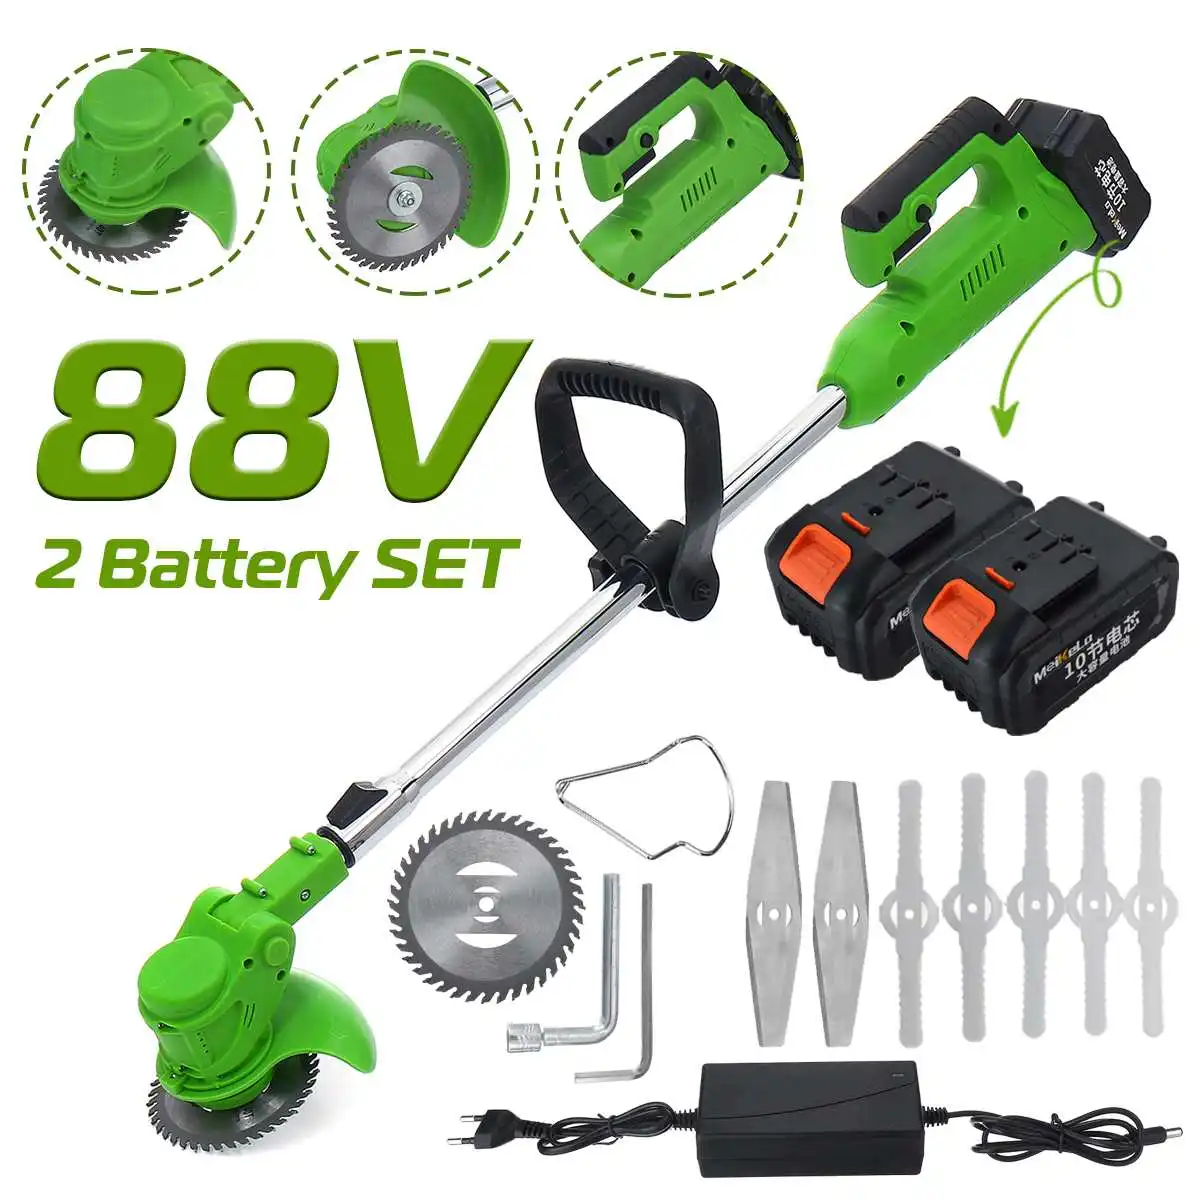 88VF Electric Lawn Mower 18000RPM Cordless Grass Trimmer Length Adjustable Cutter Household Garden Tools For Makita 18V Battery